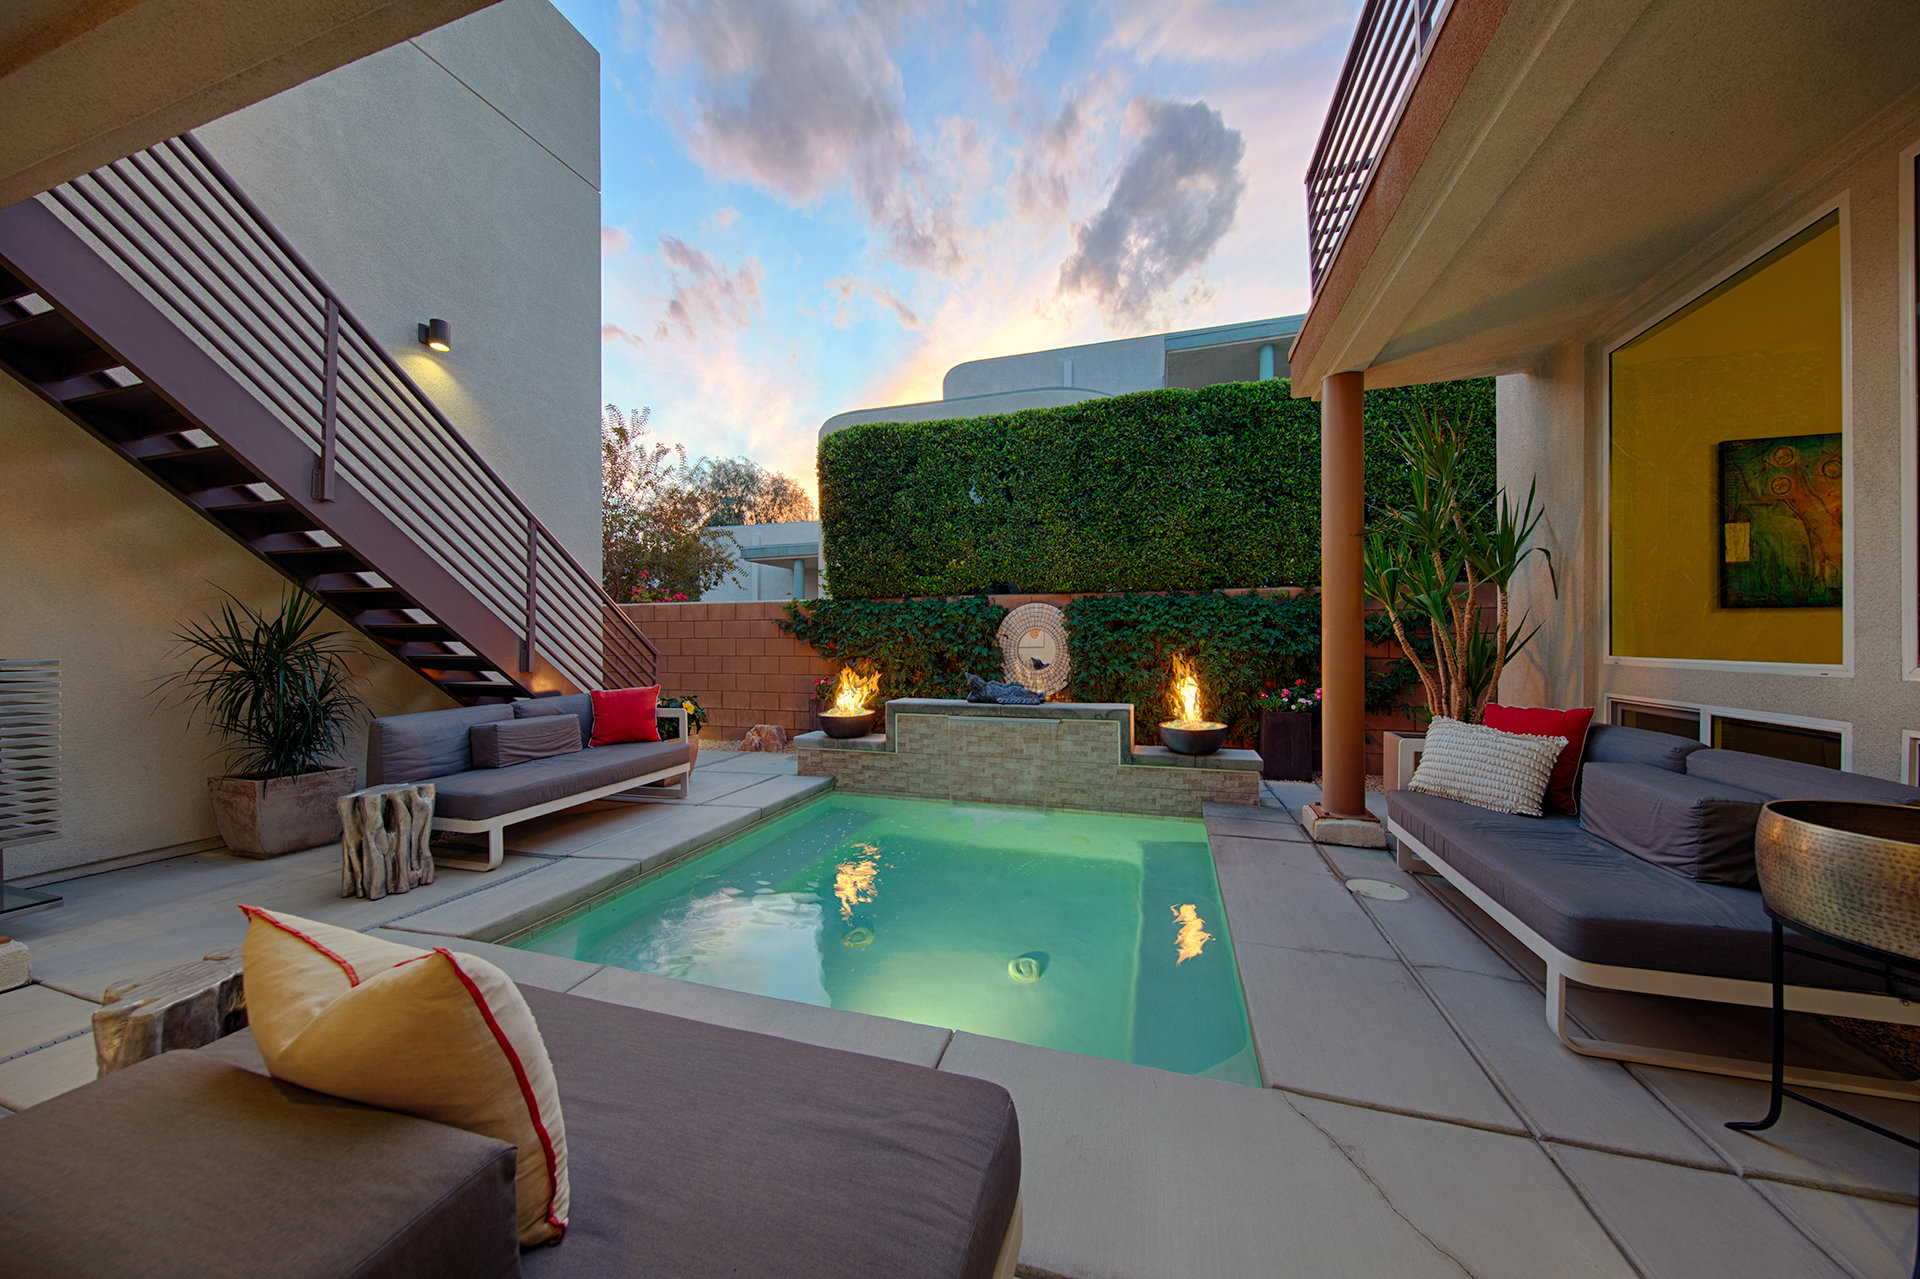 The courtyard of a home in Escena built by Lennar Homes.